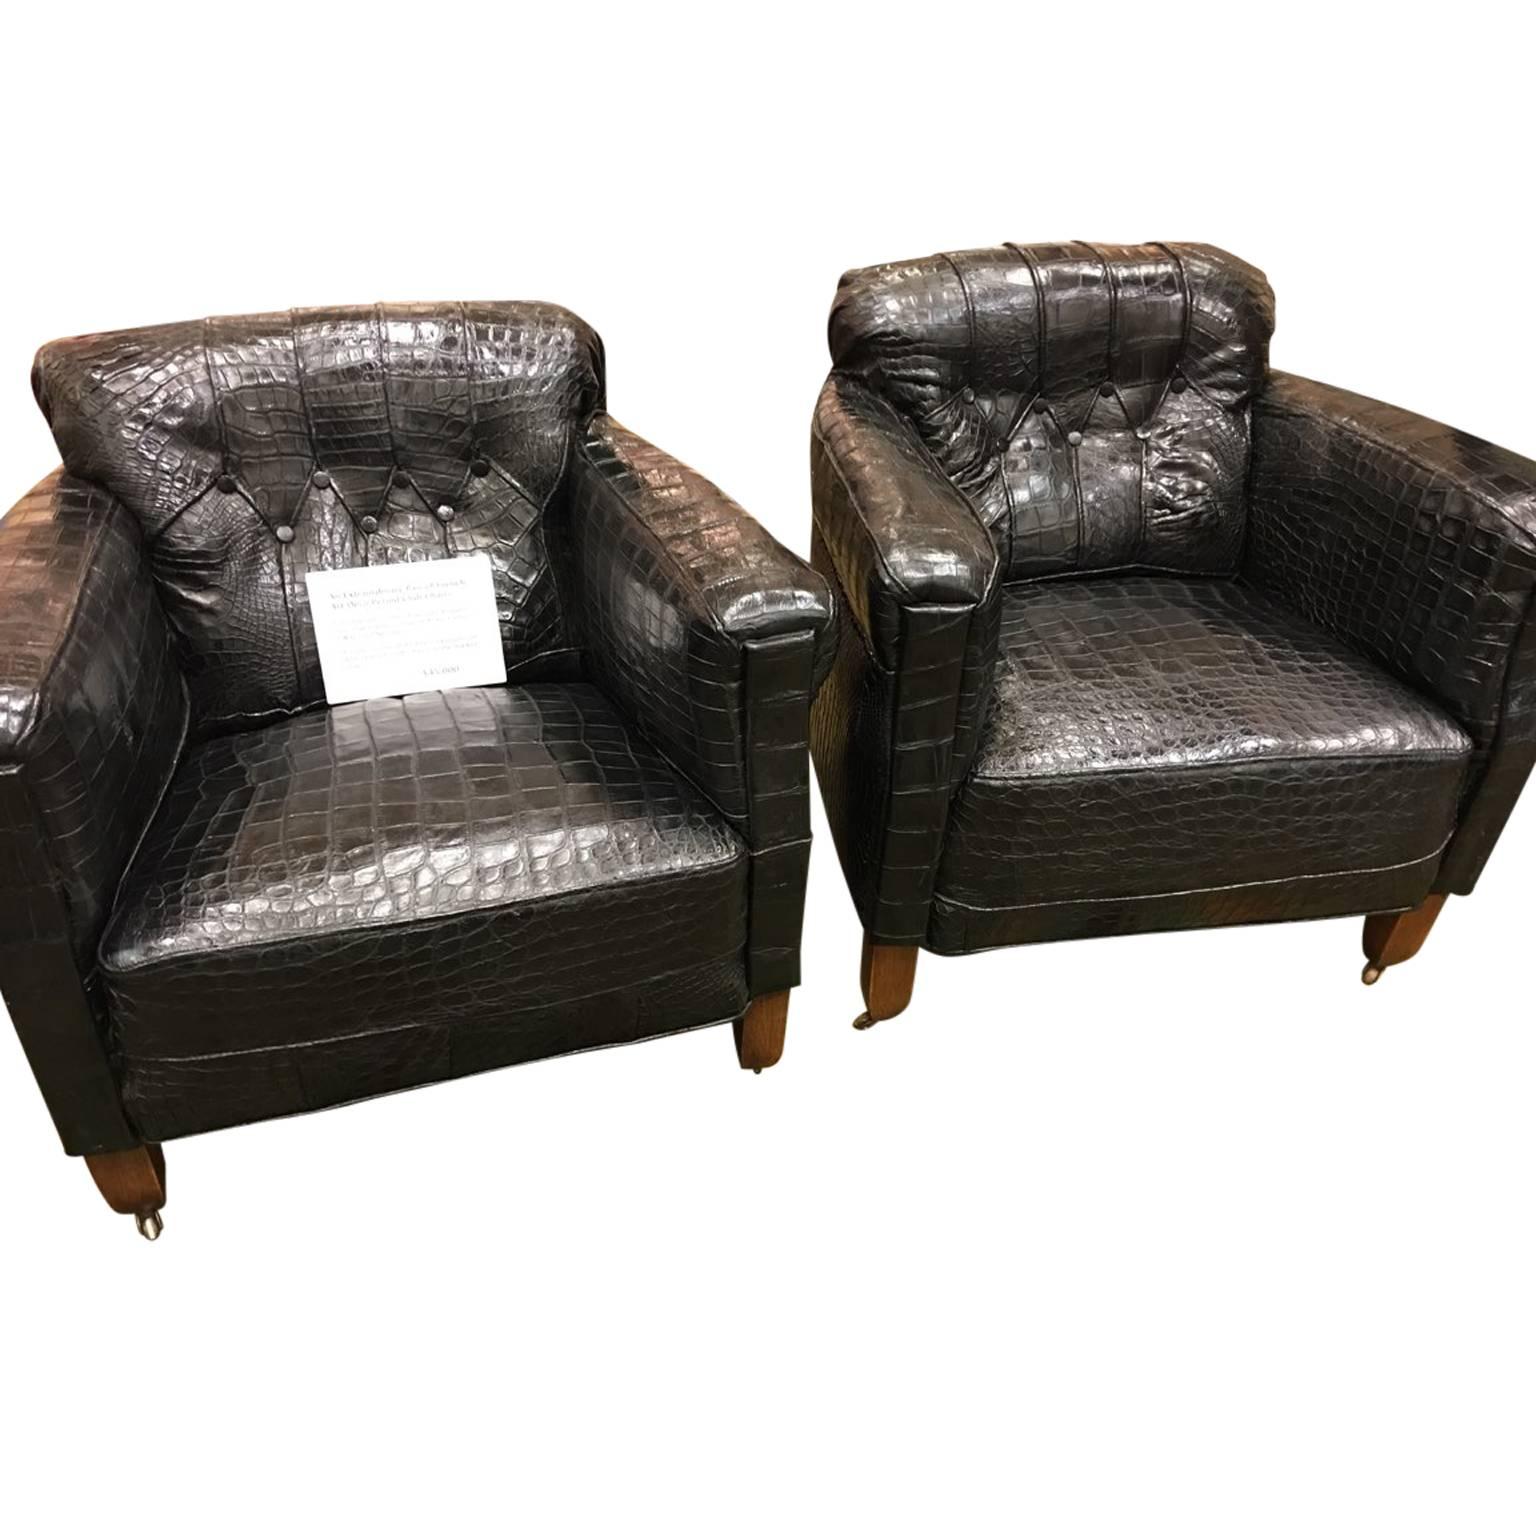 Contemporary Pair of French Art Deco Framed Black Alligator Upholstered Lounge Chairs